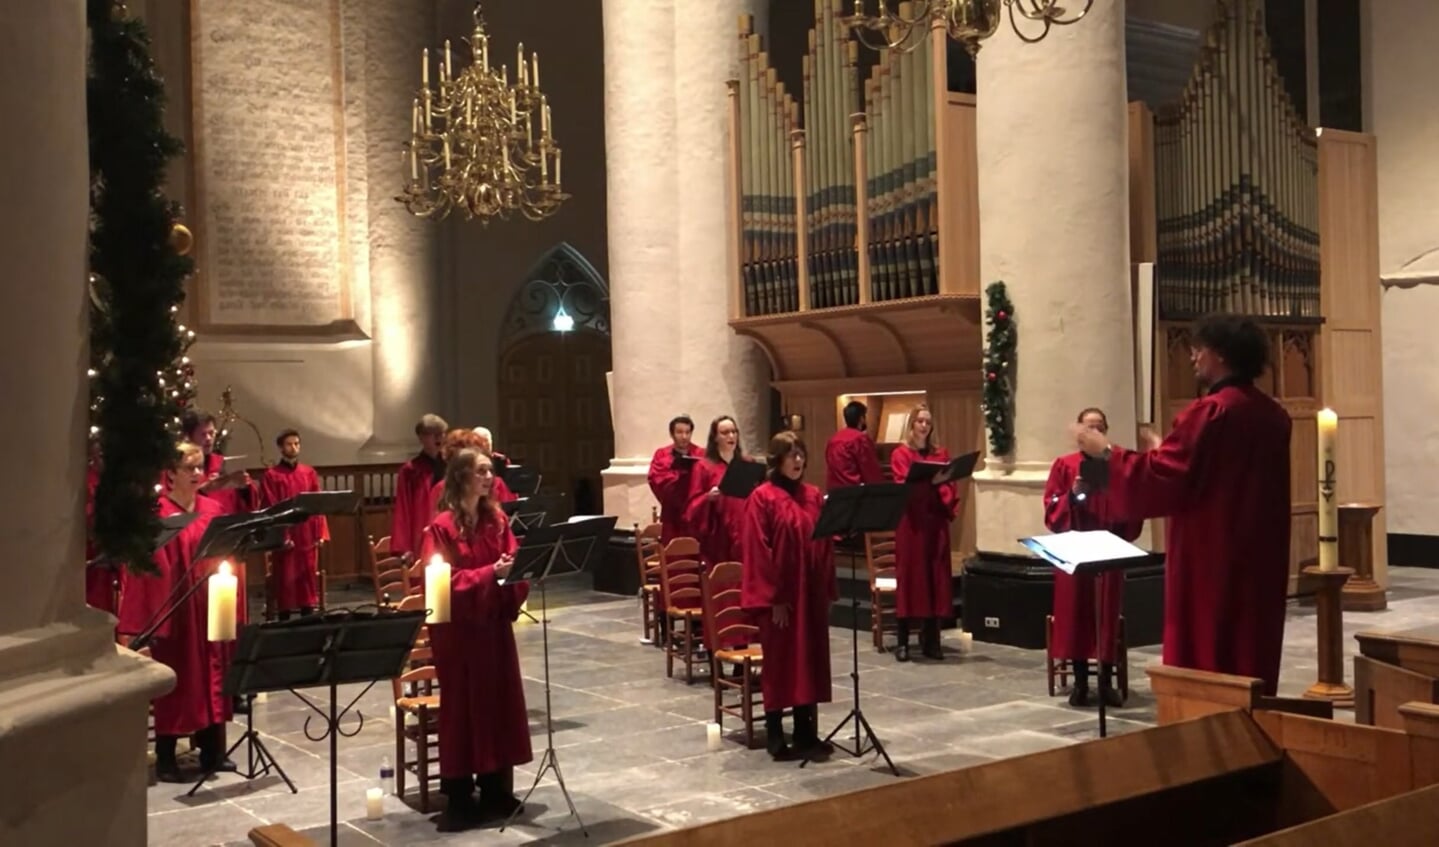 Festival of lessons and carols